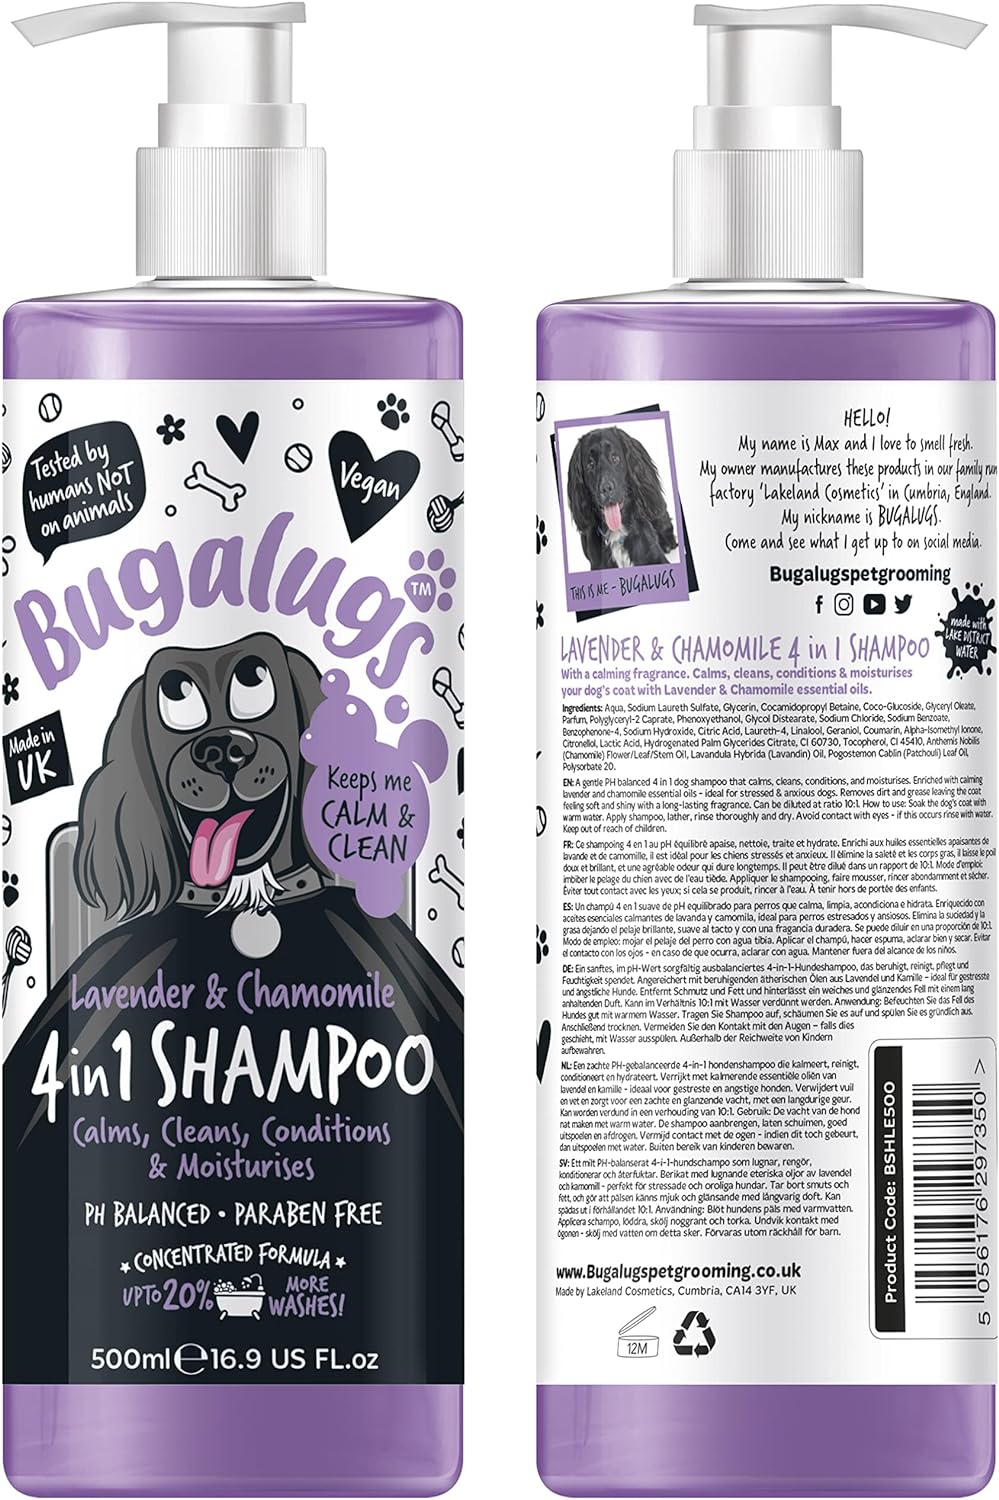 Dog Shampoo by Bugalugs lavender & chamomile 4 in 1 dog grooming shampoo products for smelly dogs with fragrance, best puppy shampoo, professional groom Vegan pet shampoo & conditioner (500ml)?5056176297350